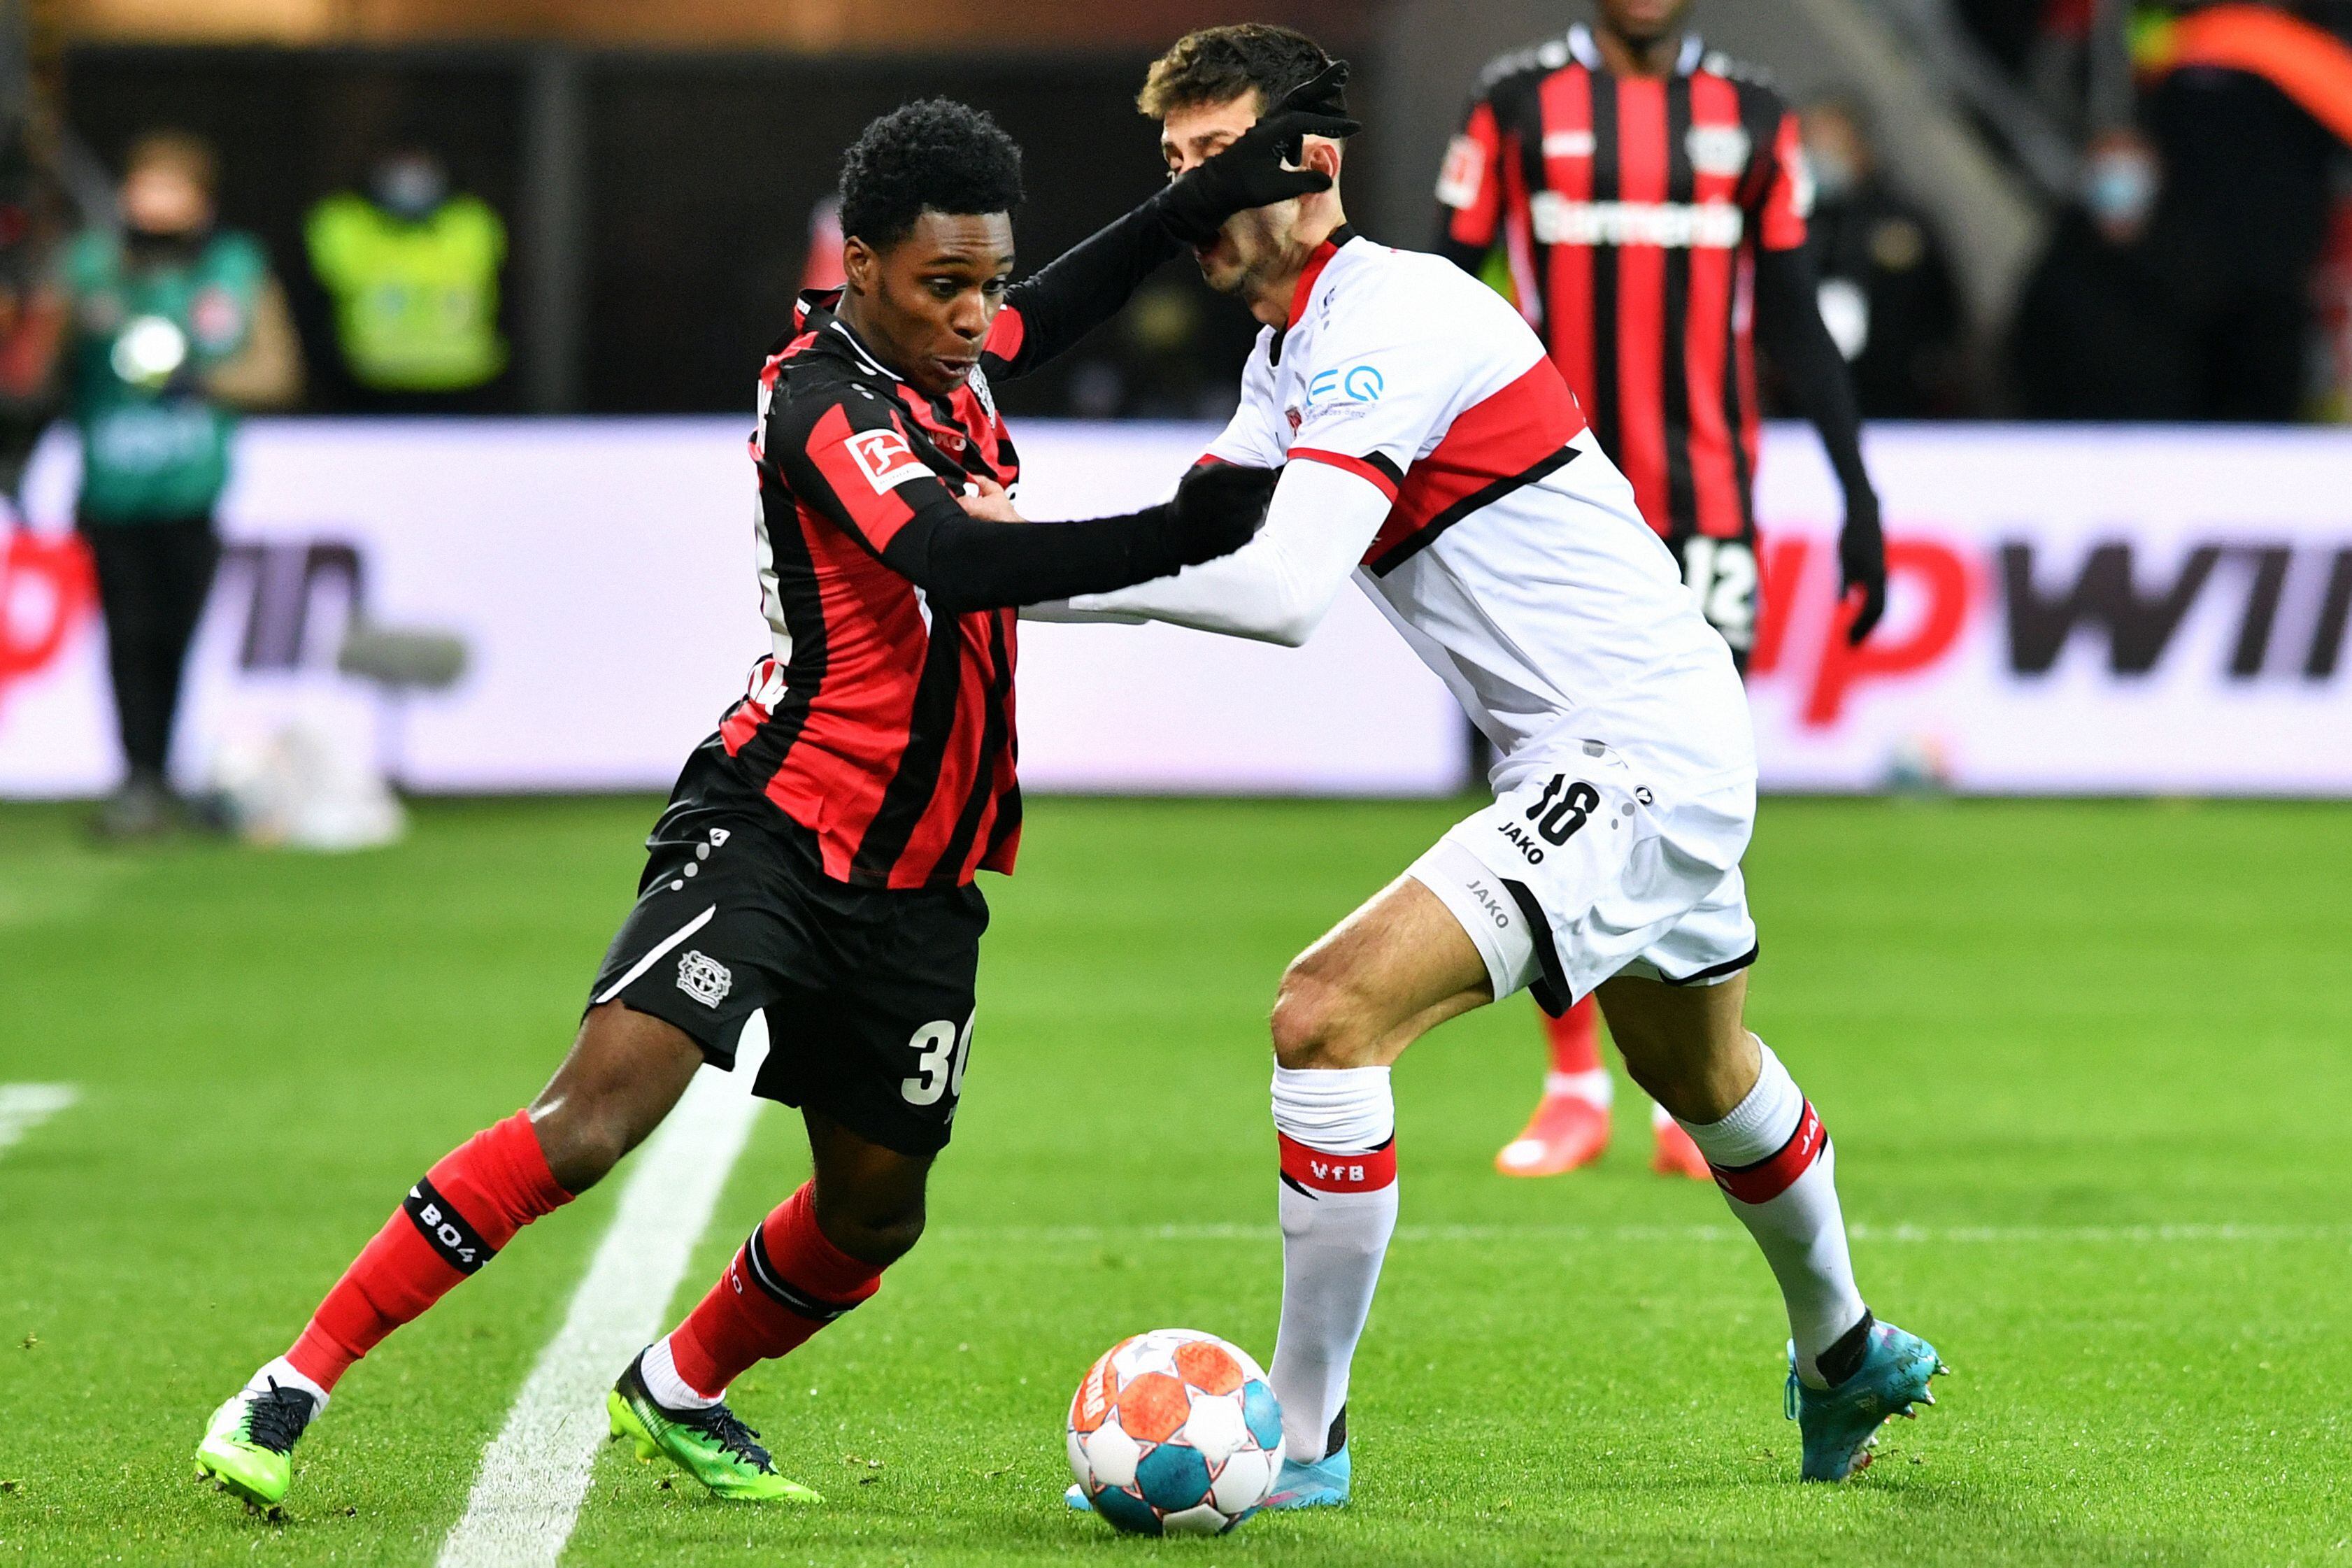 Leverkusen's Dutch defender Jeremie Frimpong (L) and Stuttgarts's Portuguese forward Tiago Tomas vie for the ball during the German first division Bundesliga football match Bayer 04 Leverkusen v VfB Stuttgart in Leverkusen on February 12, 2022. (Photo by UWE KRAFT / AFP) / DFL REGULATIONS PROHIBIT ANY USE OF PHOTOGRAPHS AS IMAGE SEQUENCES AND/OR QUASI-VIDEO